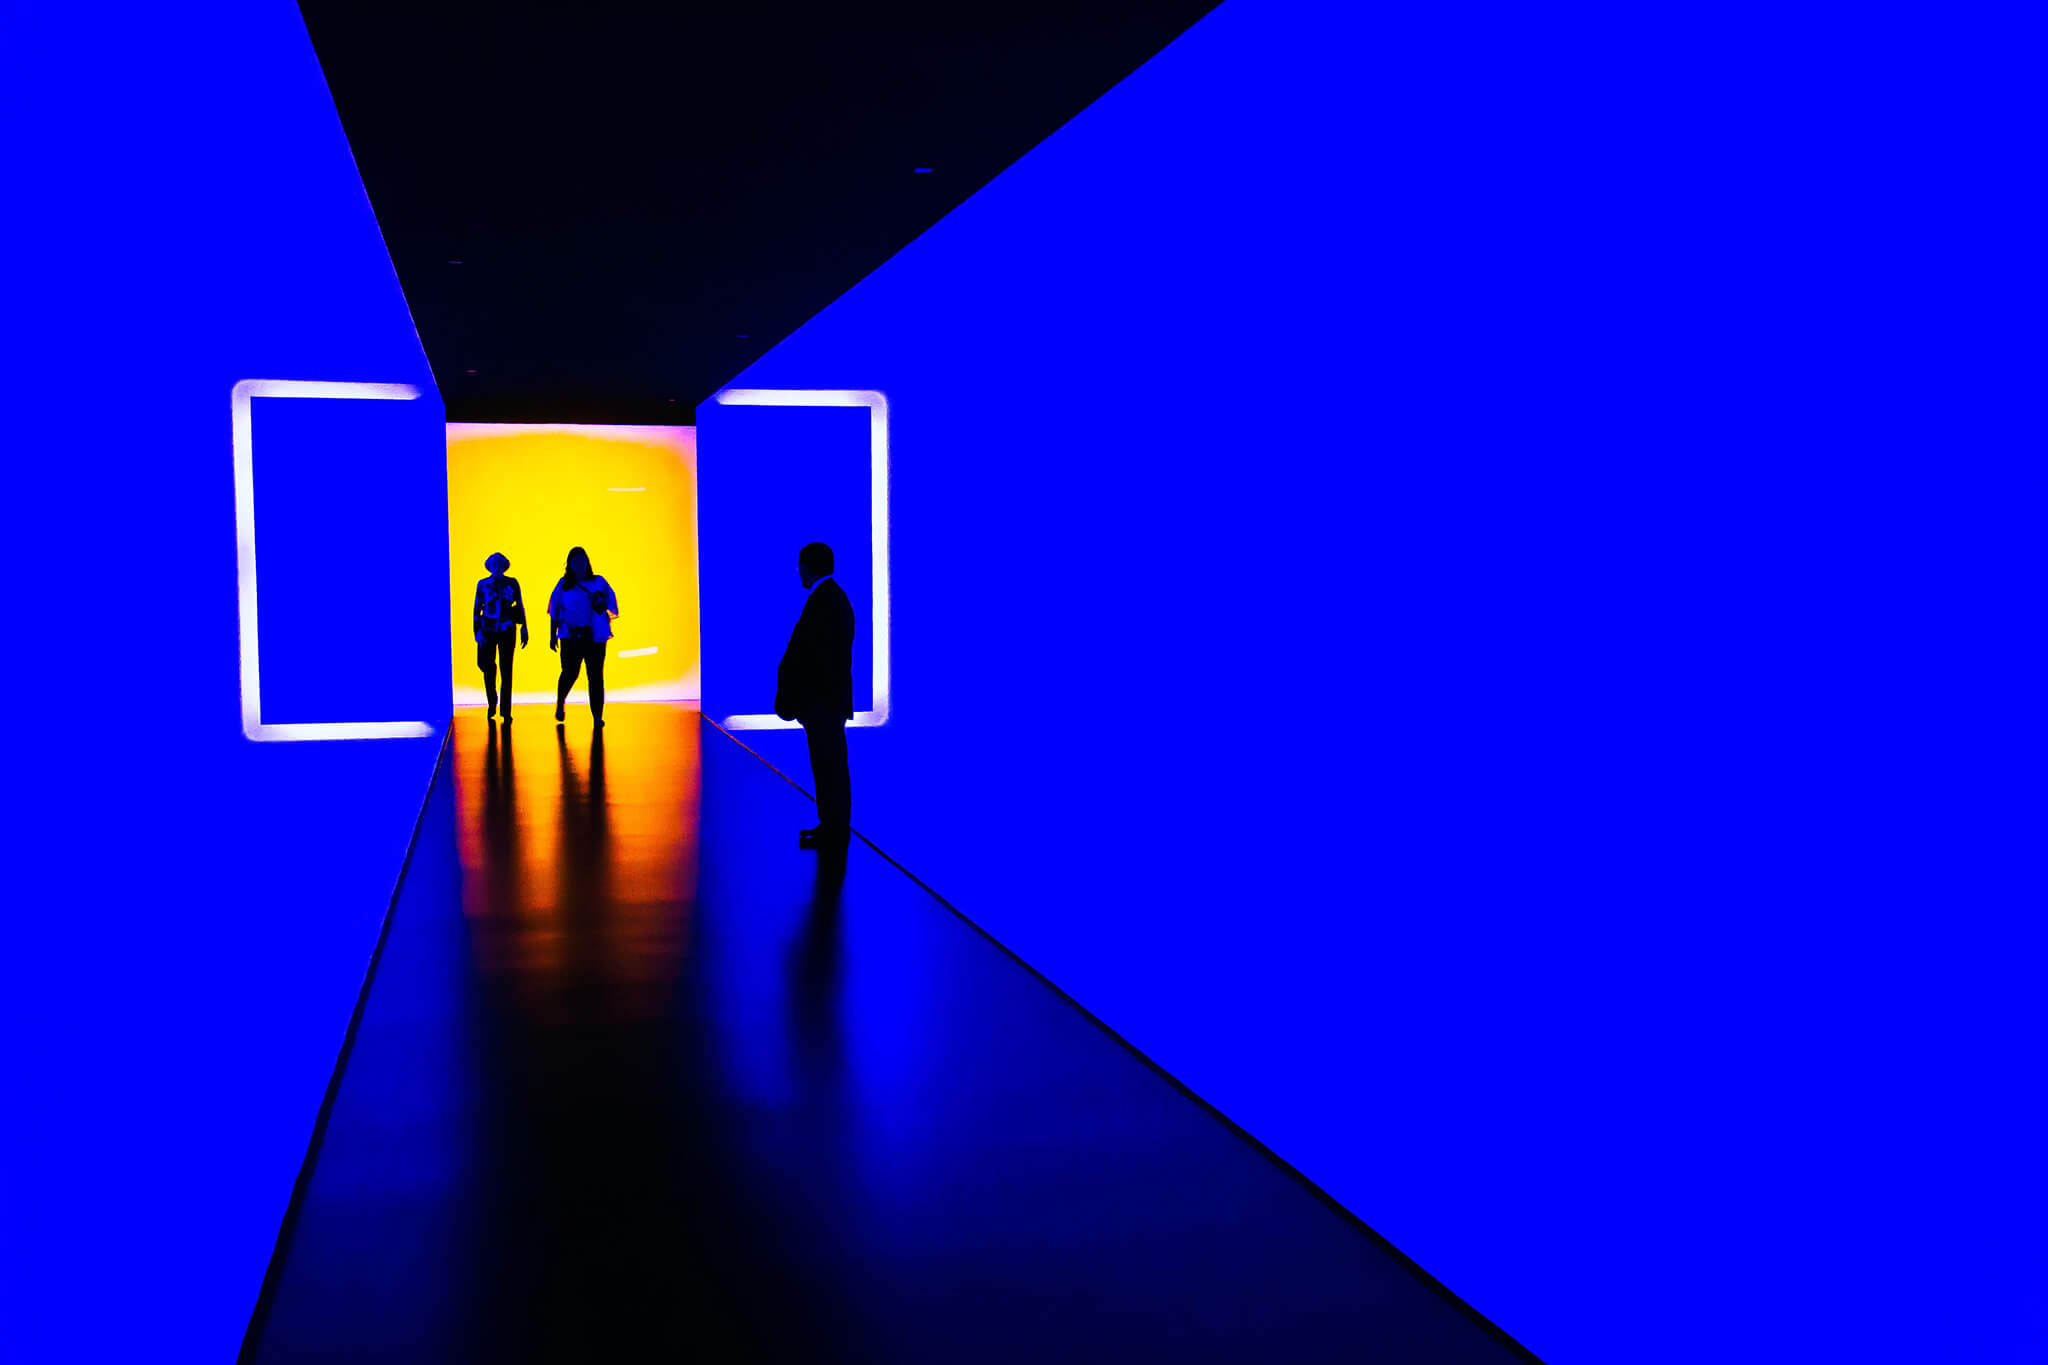 students silhouetted in a dark blue hallway